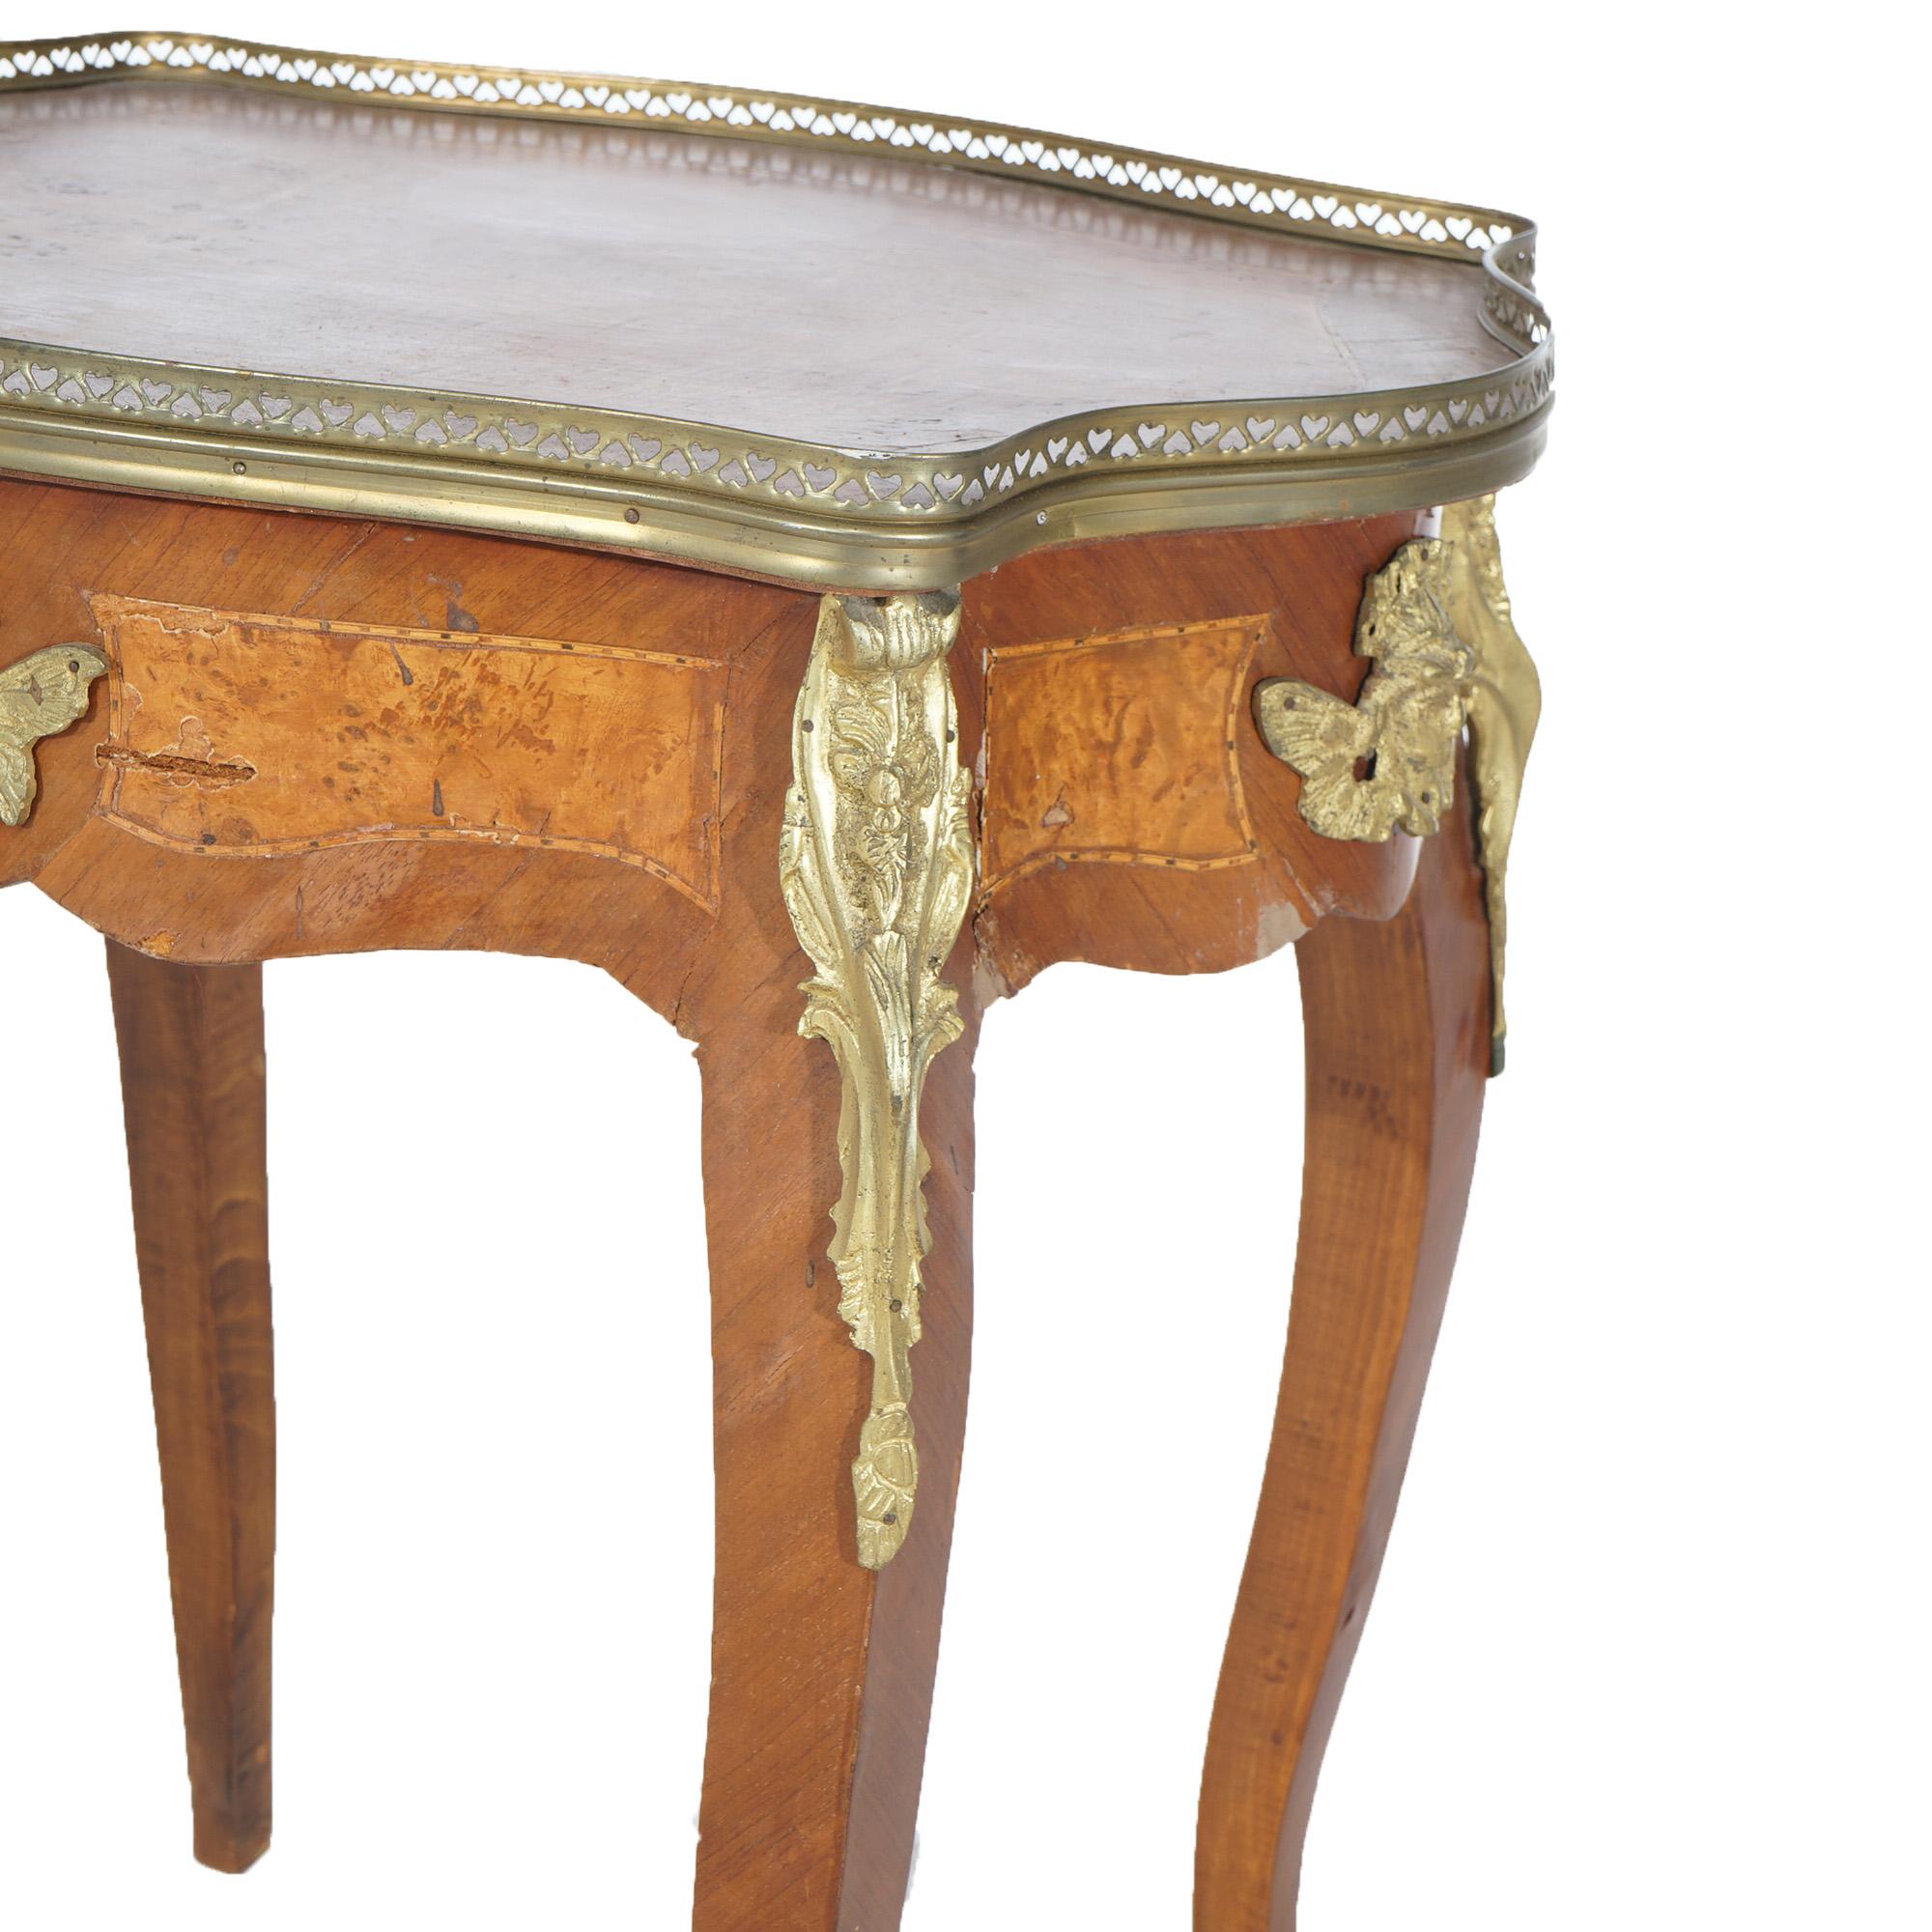 19th Century Antique Louis XIV Style Kingwood, Burl & Ormolu Inlay Side Table C1890 For Sale